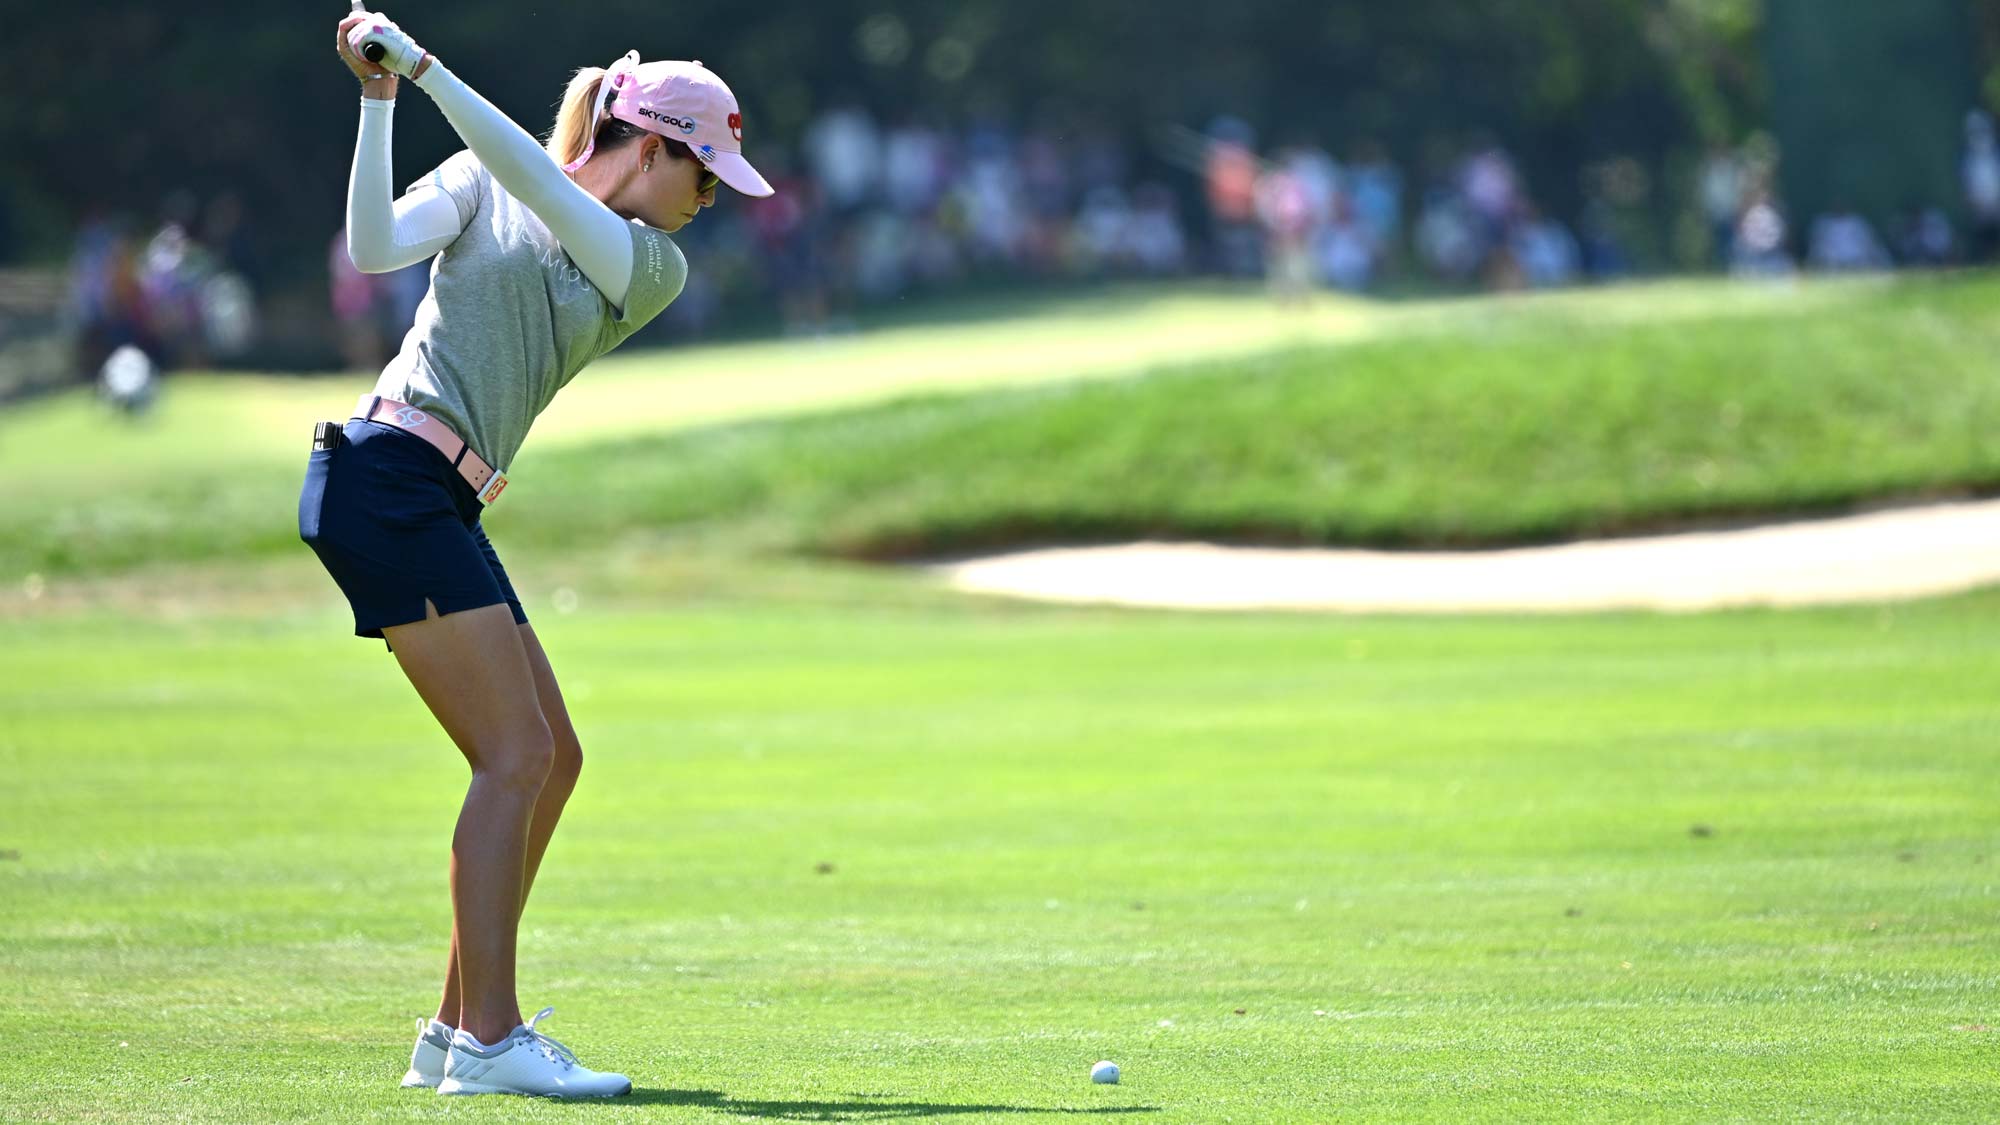 Paula Creamer of The United States on the ninth during day 2 of the Evian Championship